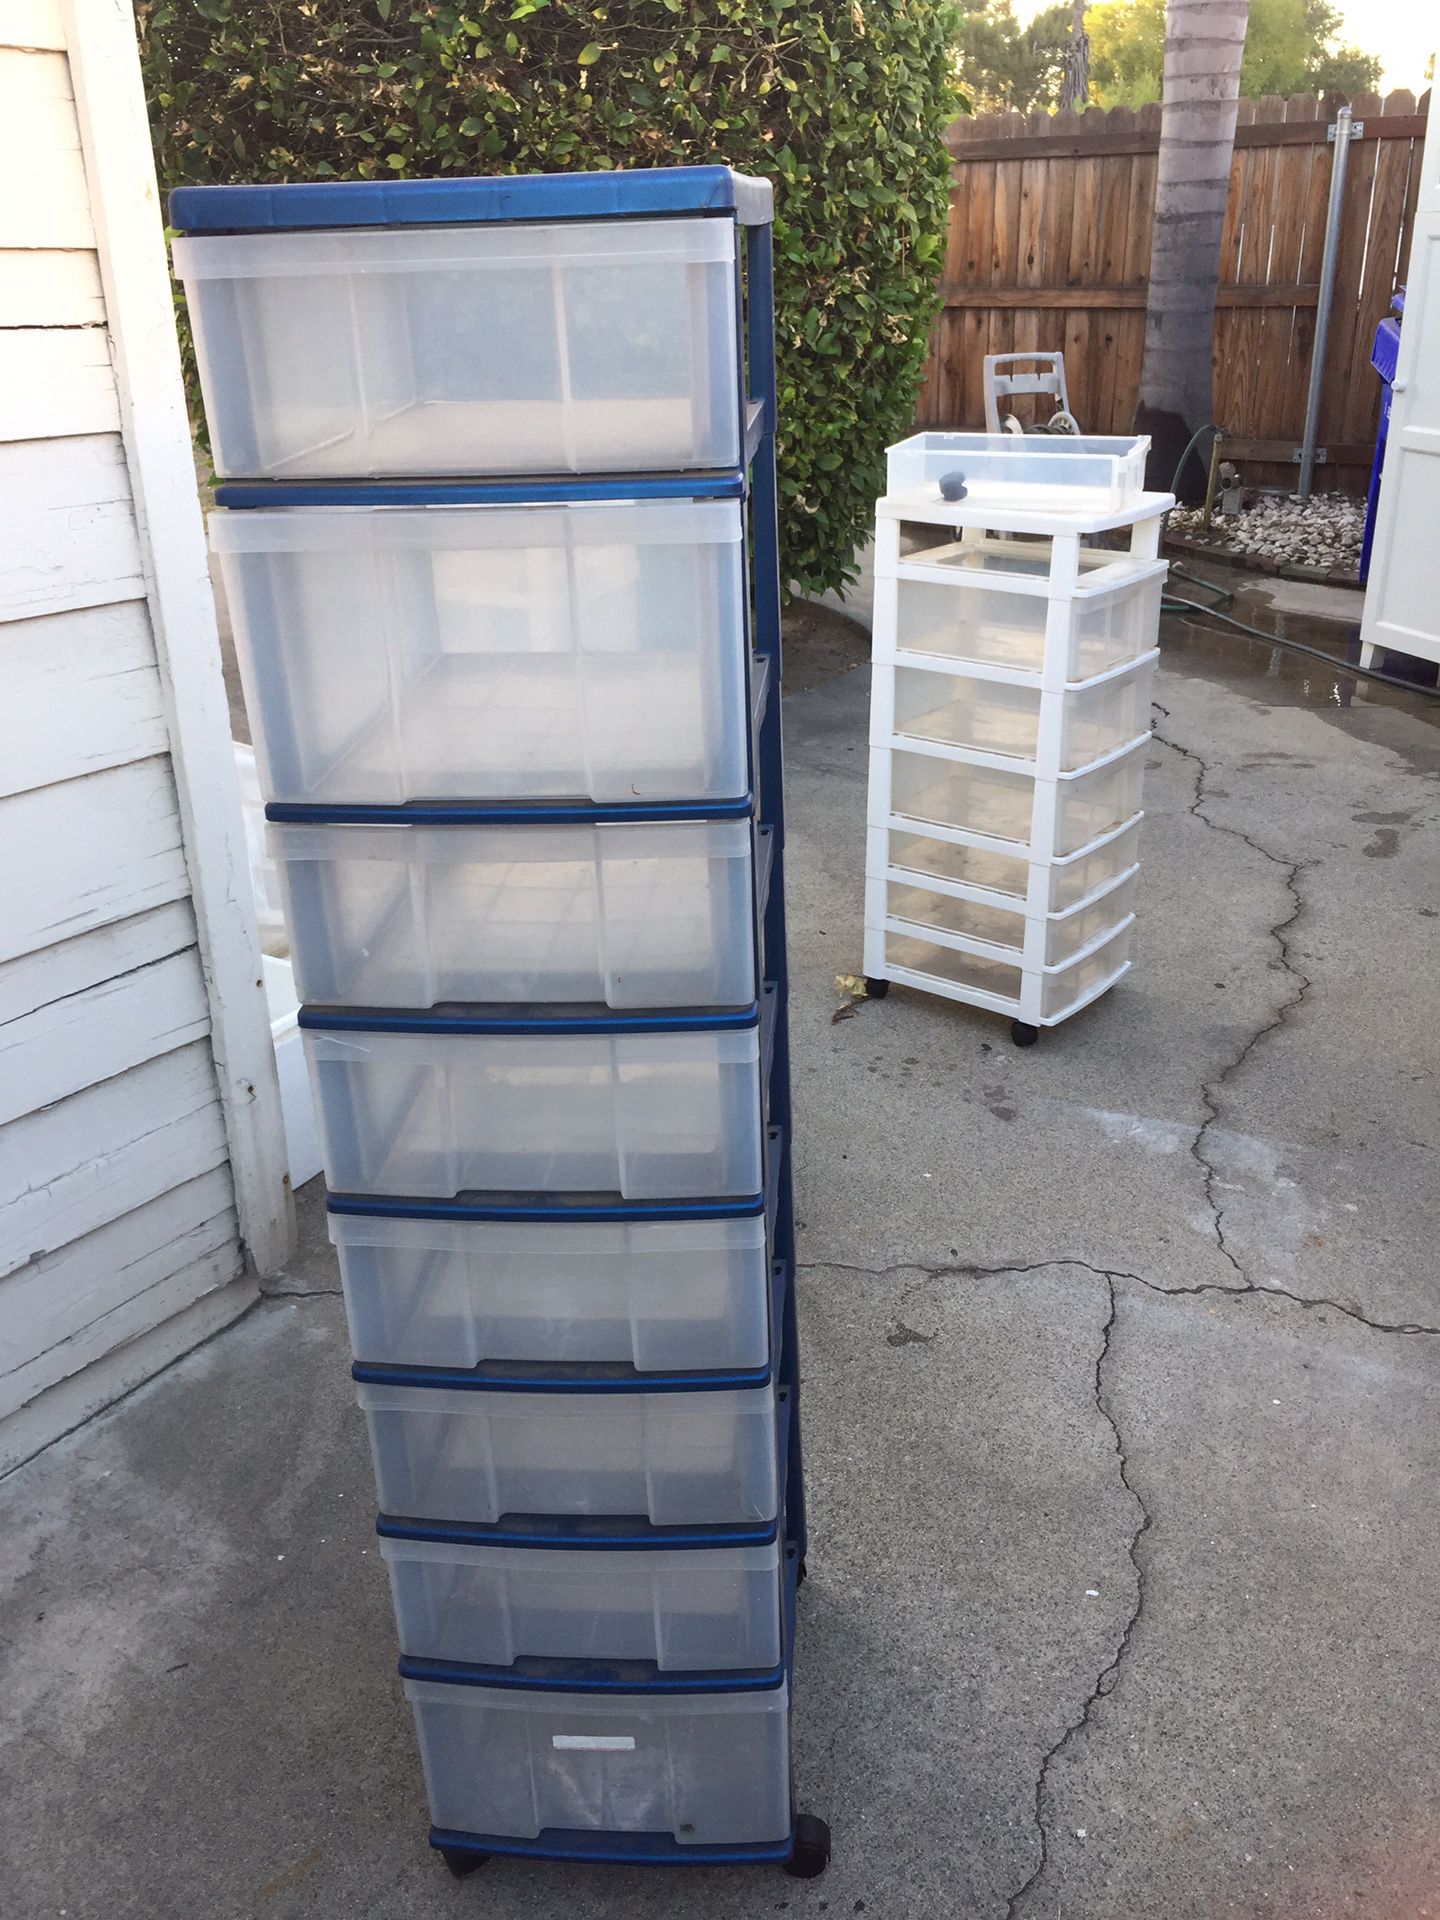 Tall plastic drawers on rollers